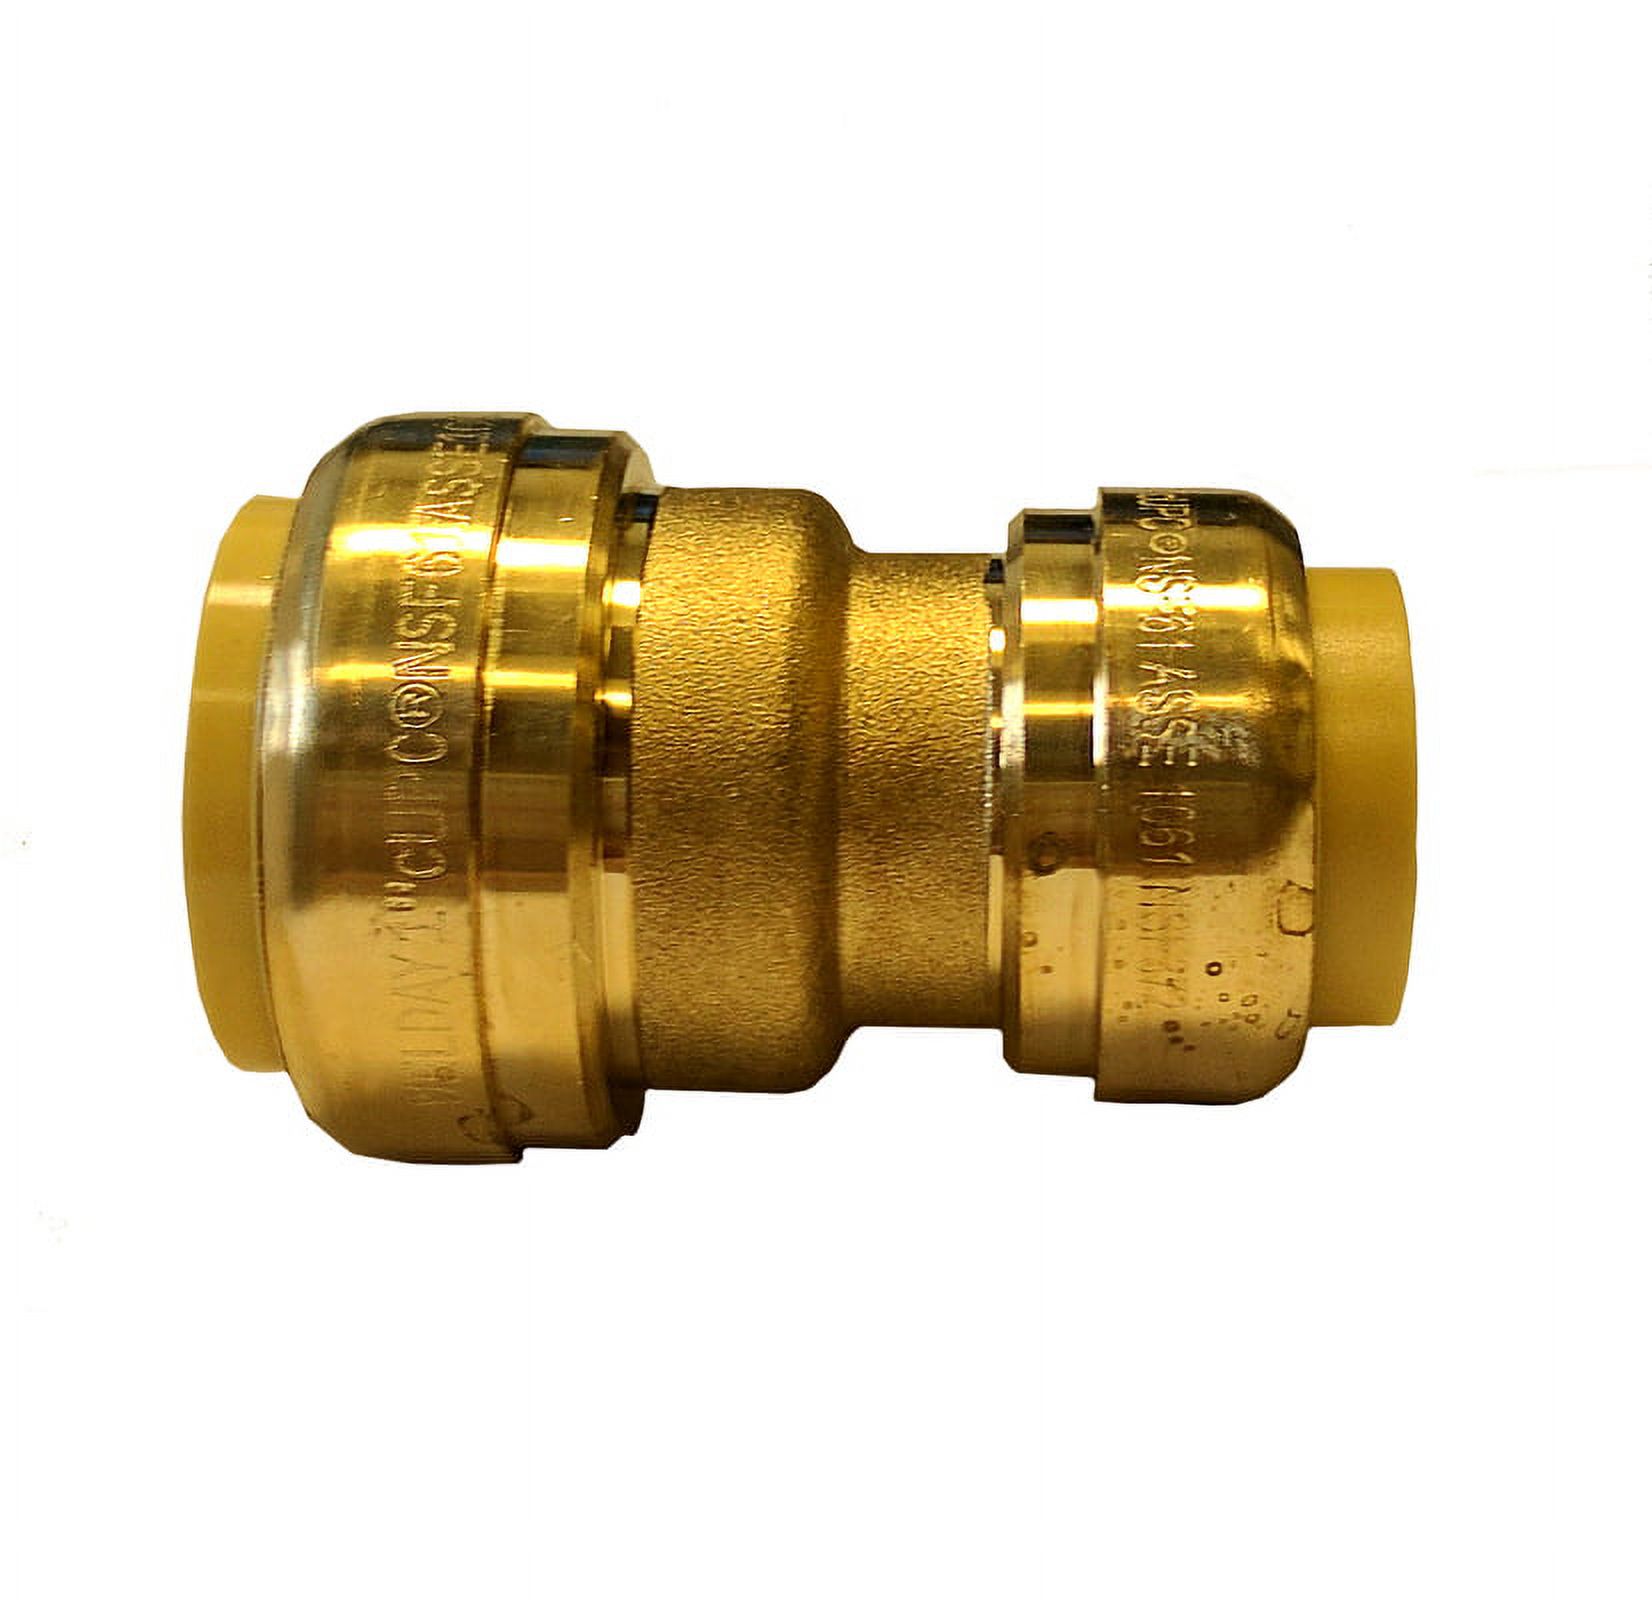 Libra Supply Lead Free 1-1/2 x 1-1/4 inch Push-Fit Coupling, Push to Connect, (Click in for more size options), 1-1/2'' x 1-1/4'', 1-1/2 x 1-1/4-inch, Fits copper tubing, CTS, CPVC and PEX - image 1 of 4